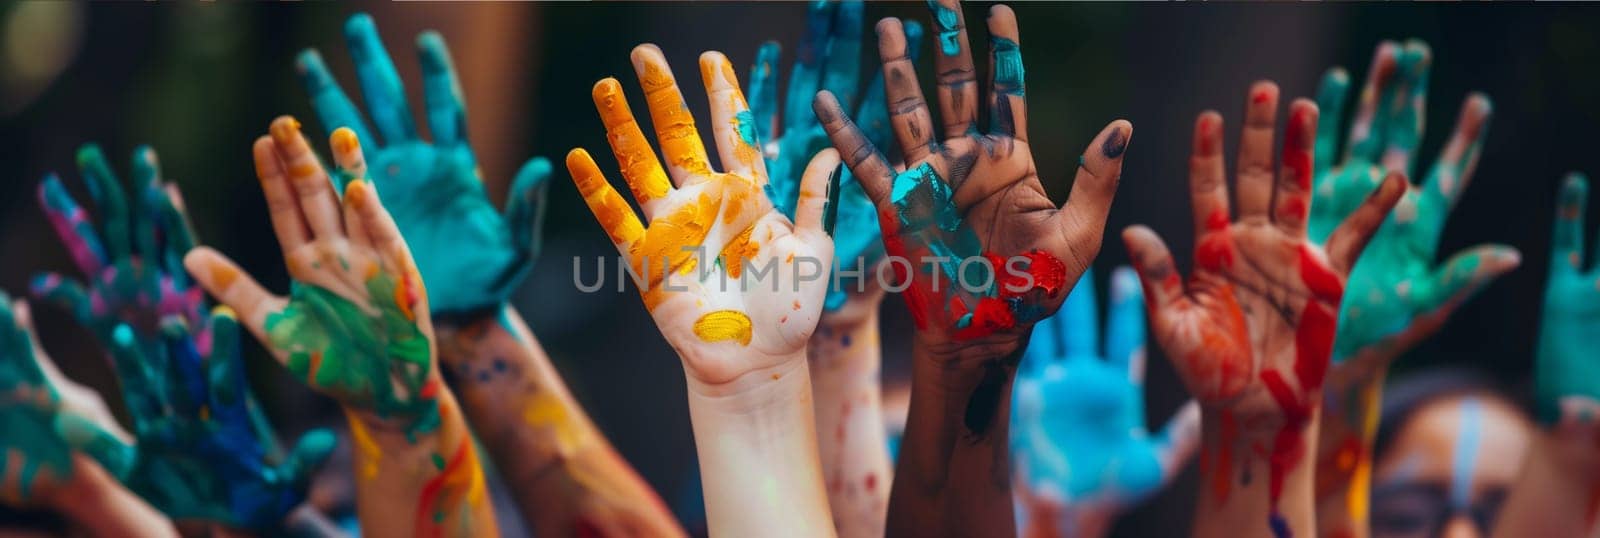 Several individuals celebrate International Friends Day by painting their hands with a variety of bright colors, creating a vibrant and dynamic scene.